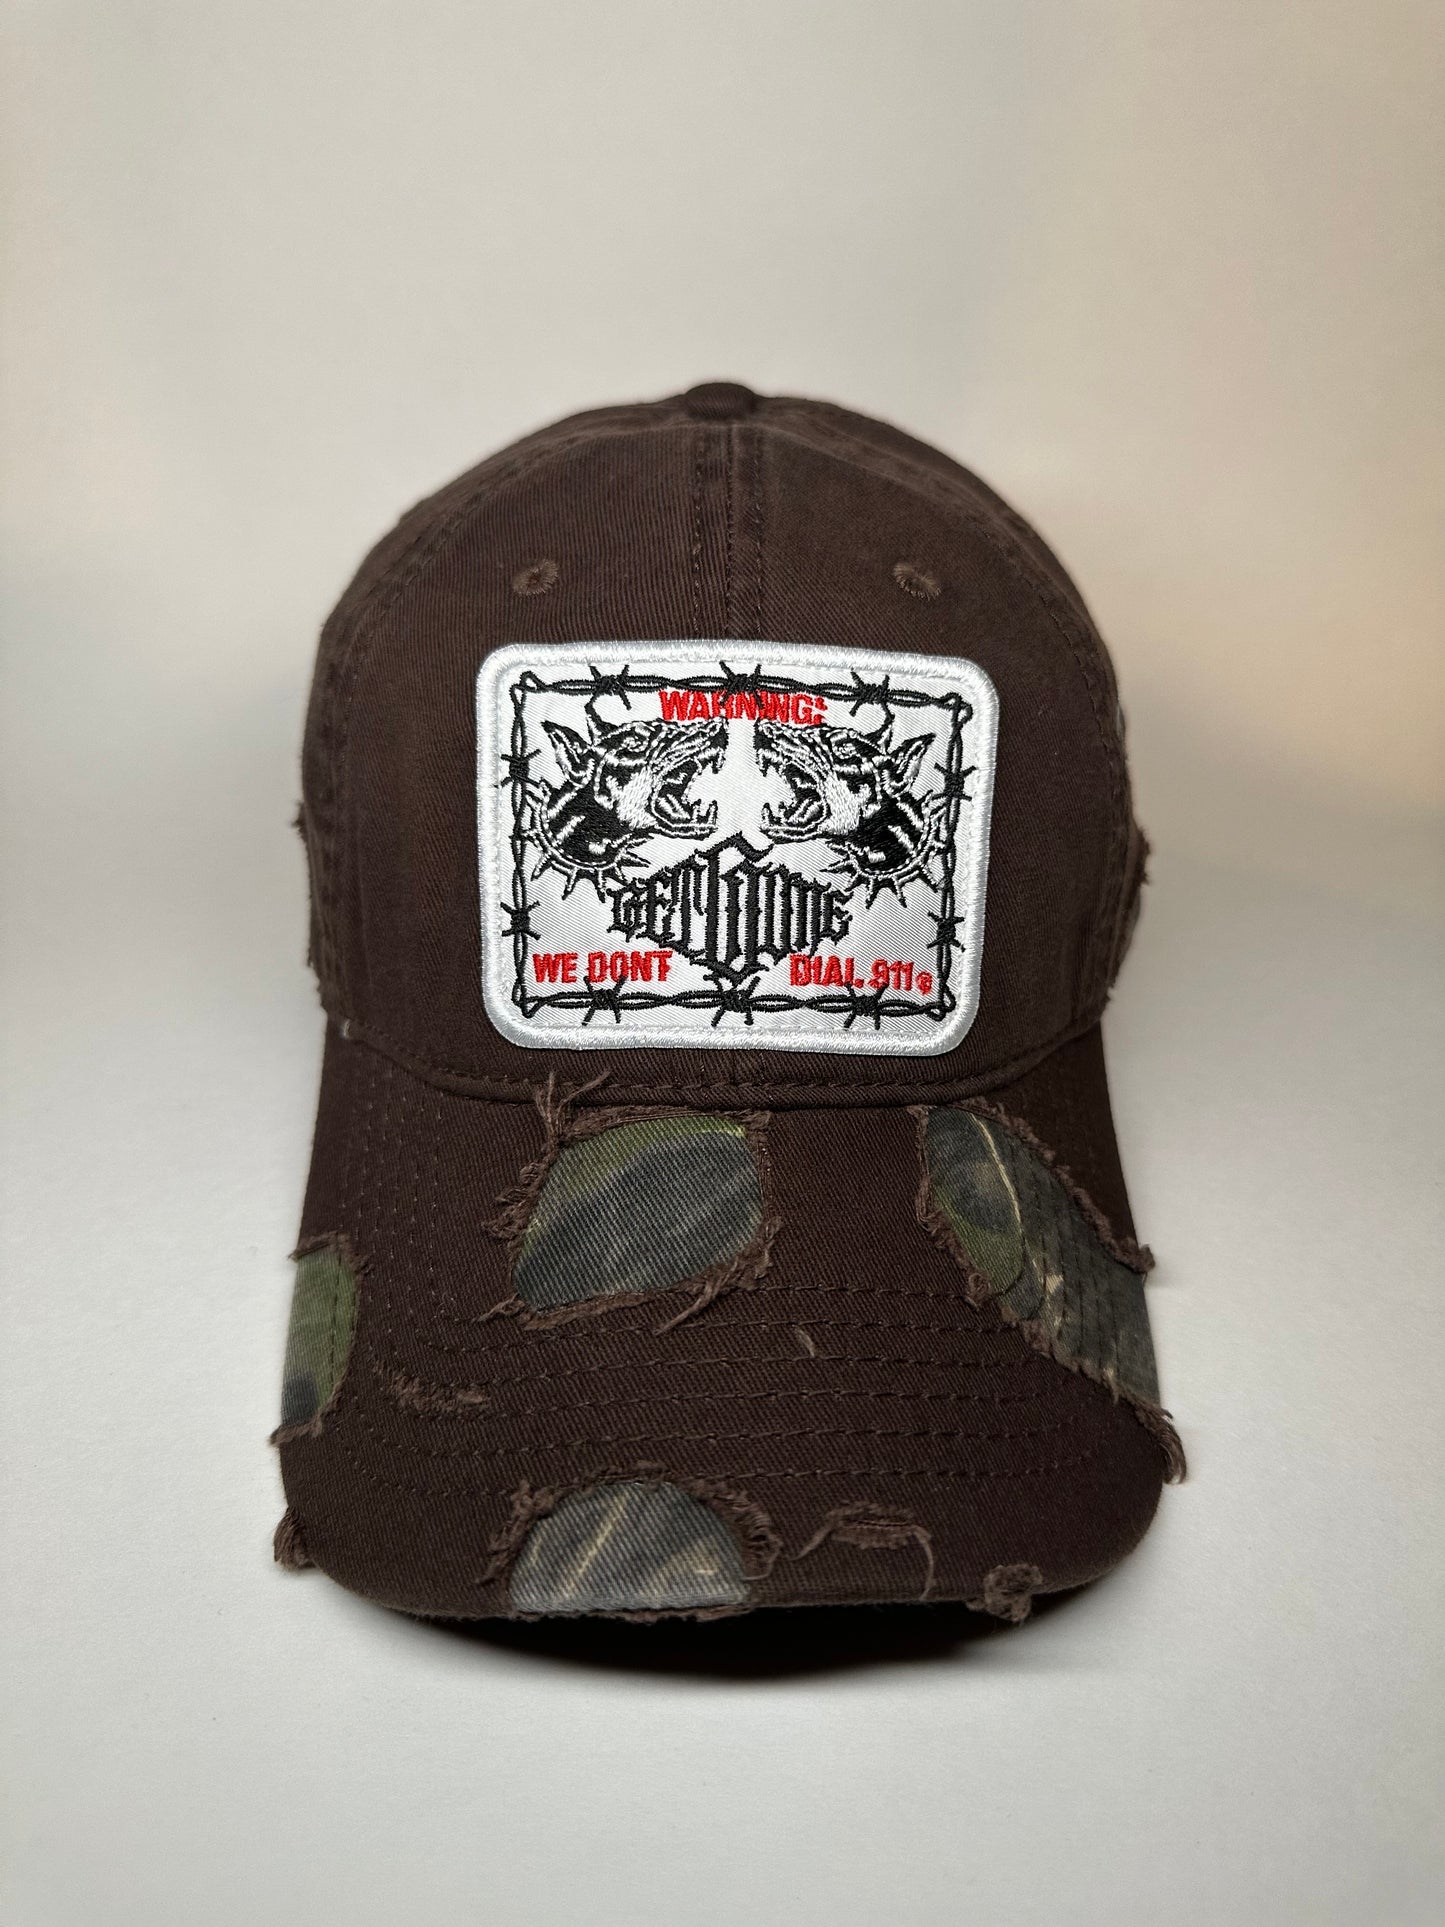 WE DON’T DIALL 911 HAT|RIPPED BROWN|